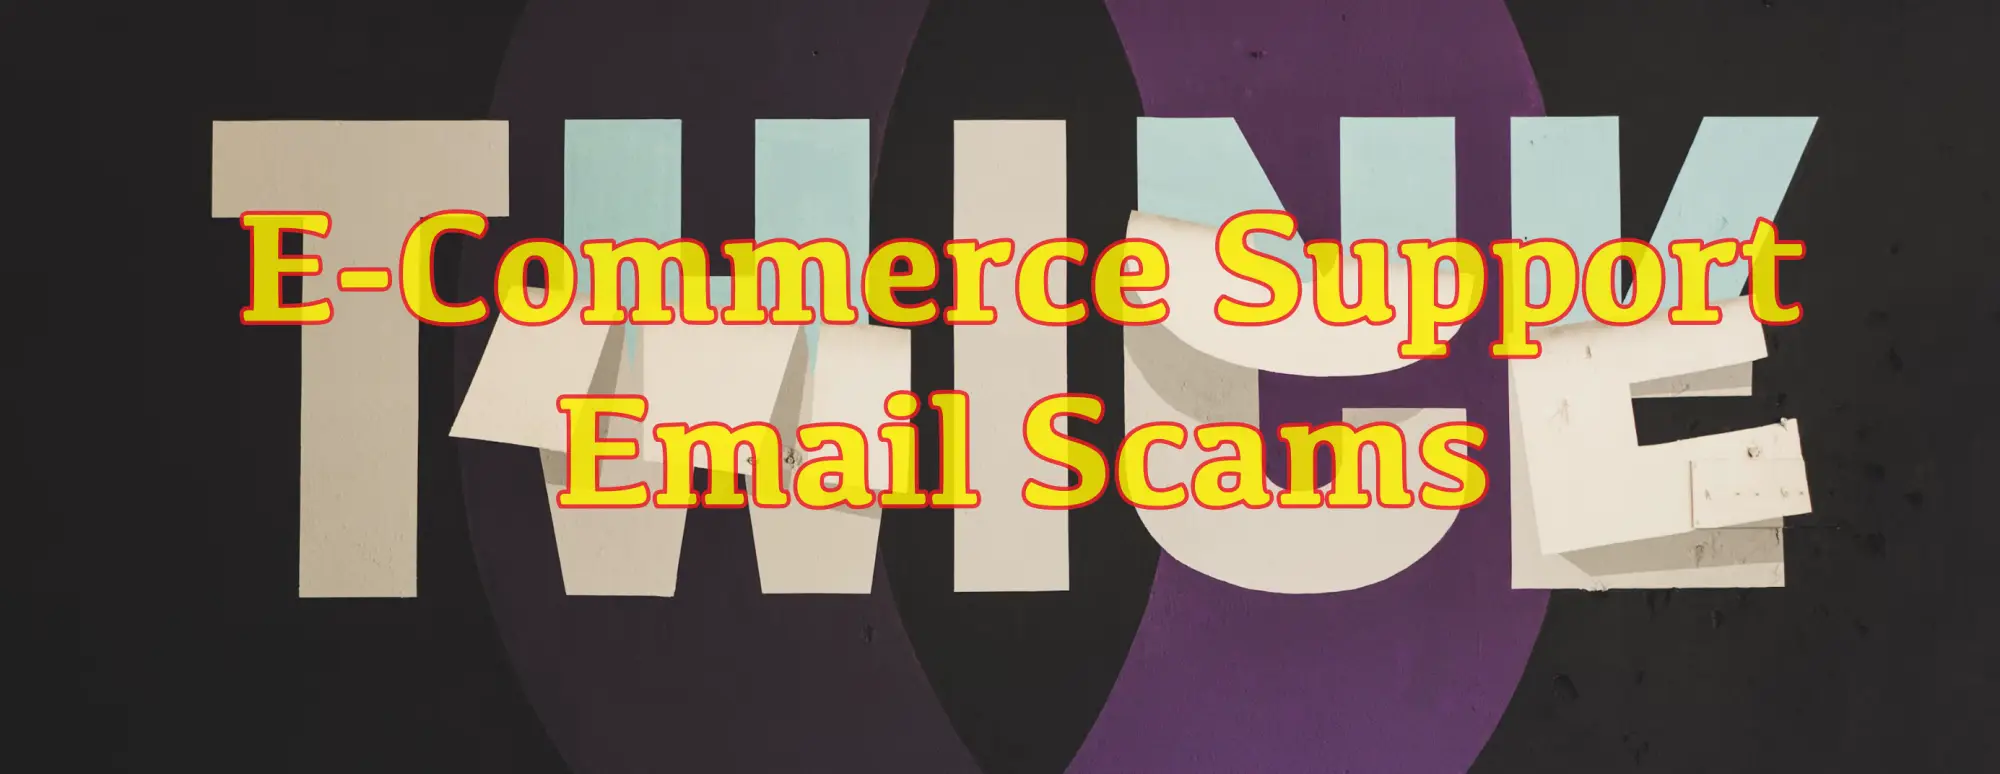 E-Commerce Support Email Scams